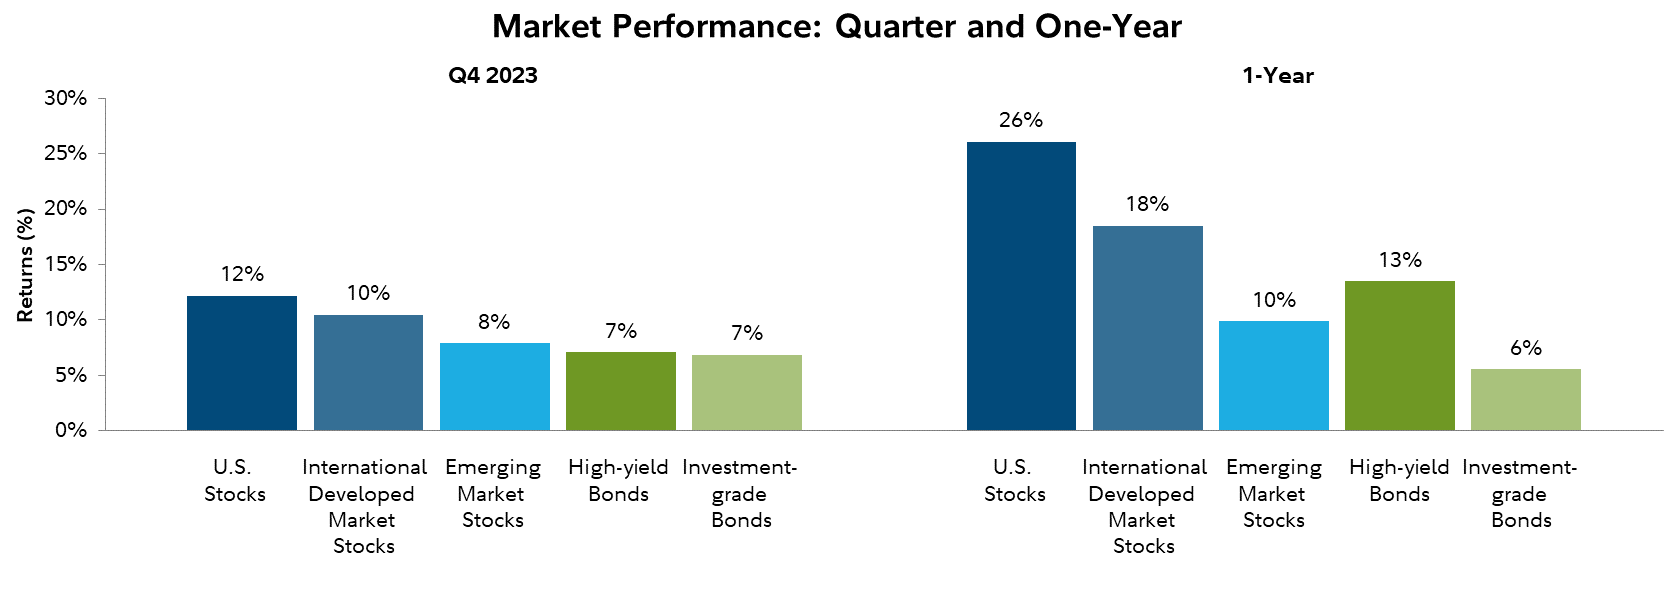 Market Performance: Quarter and One-Year 2023 Q4